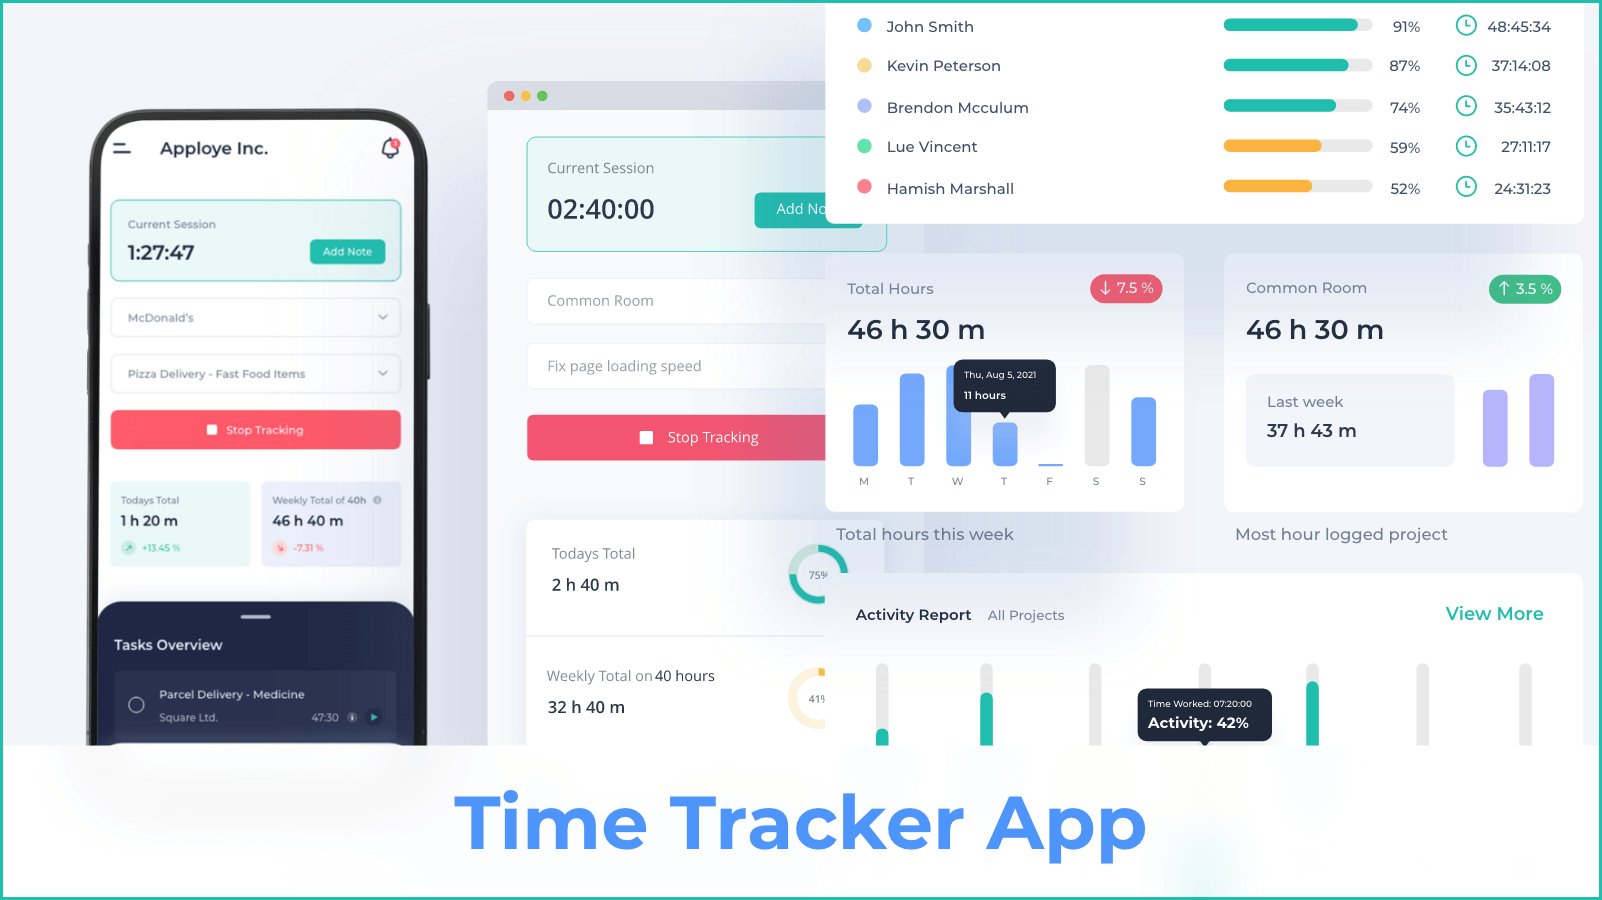 Maximize productivity with accurate time tracking
Stay organized with customizable time preferences